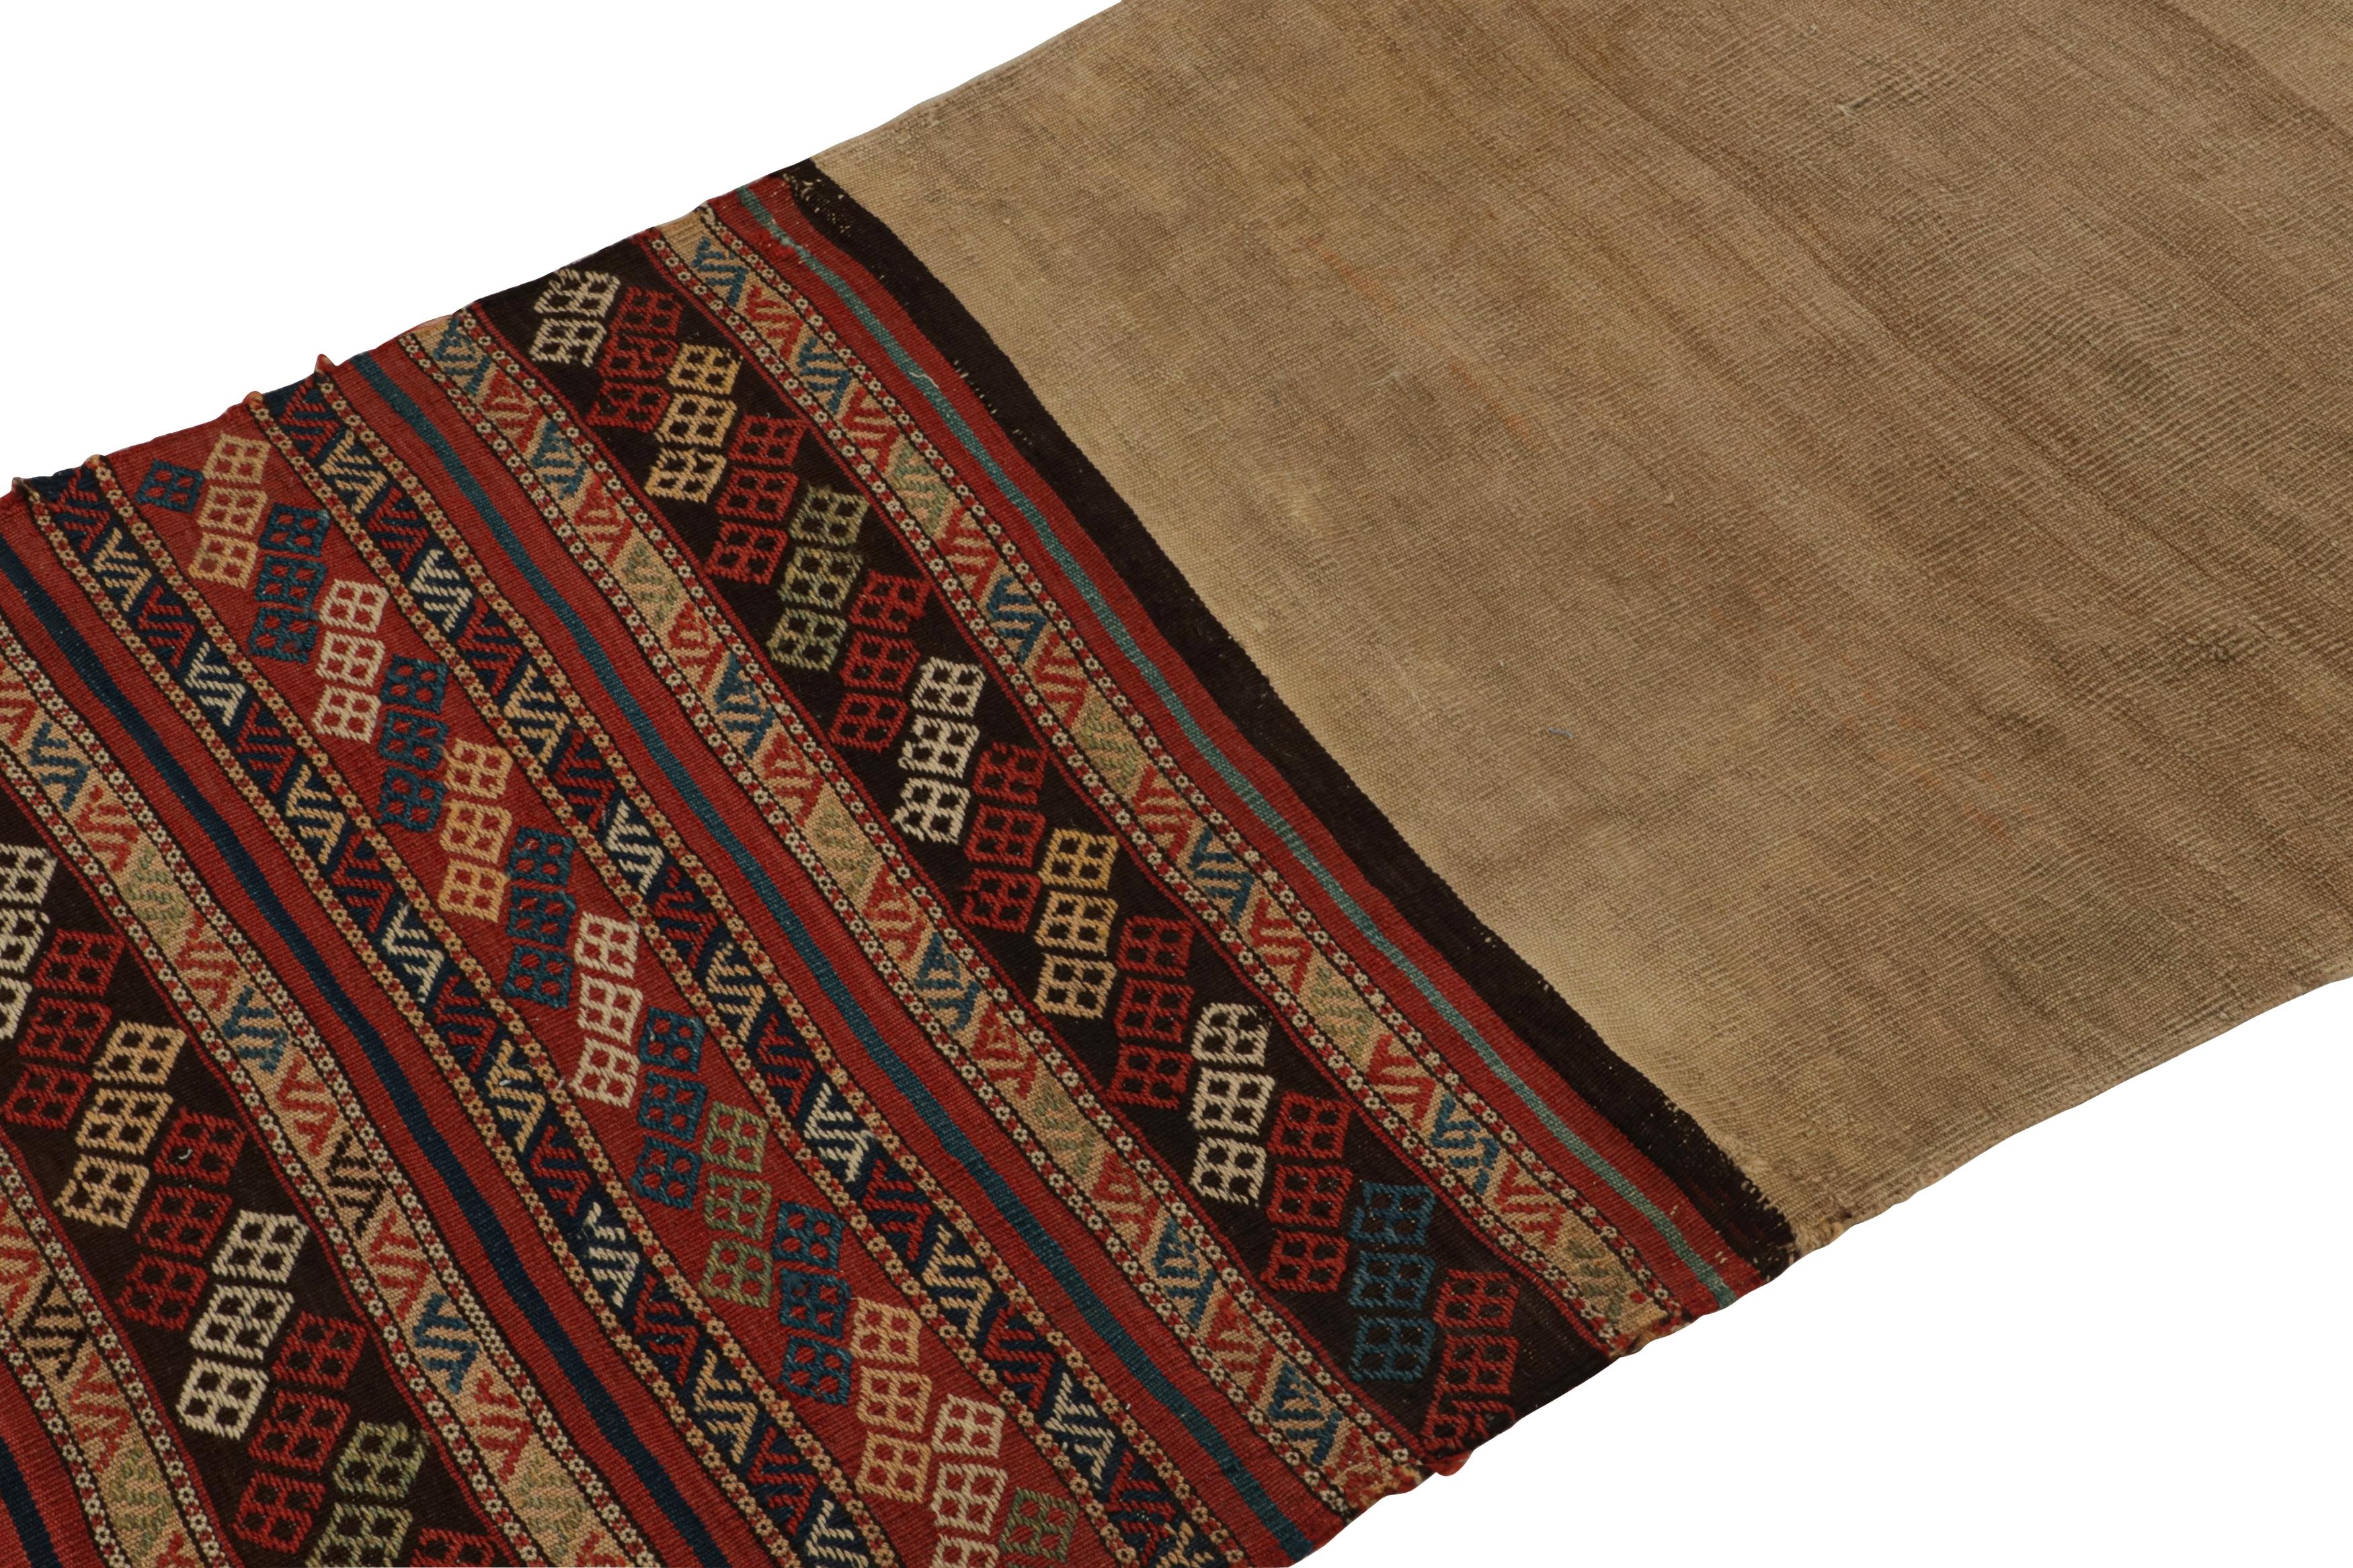 Hand-Woven Antique Persian Bag Kilim Runner with Geometric Patterns, from Rug & Kilim For Sale